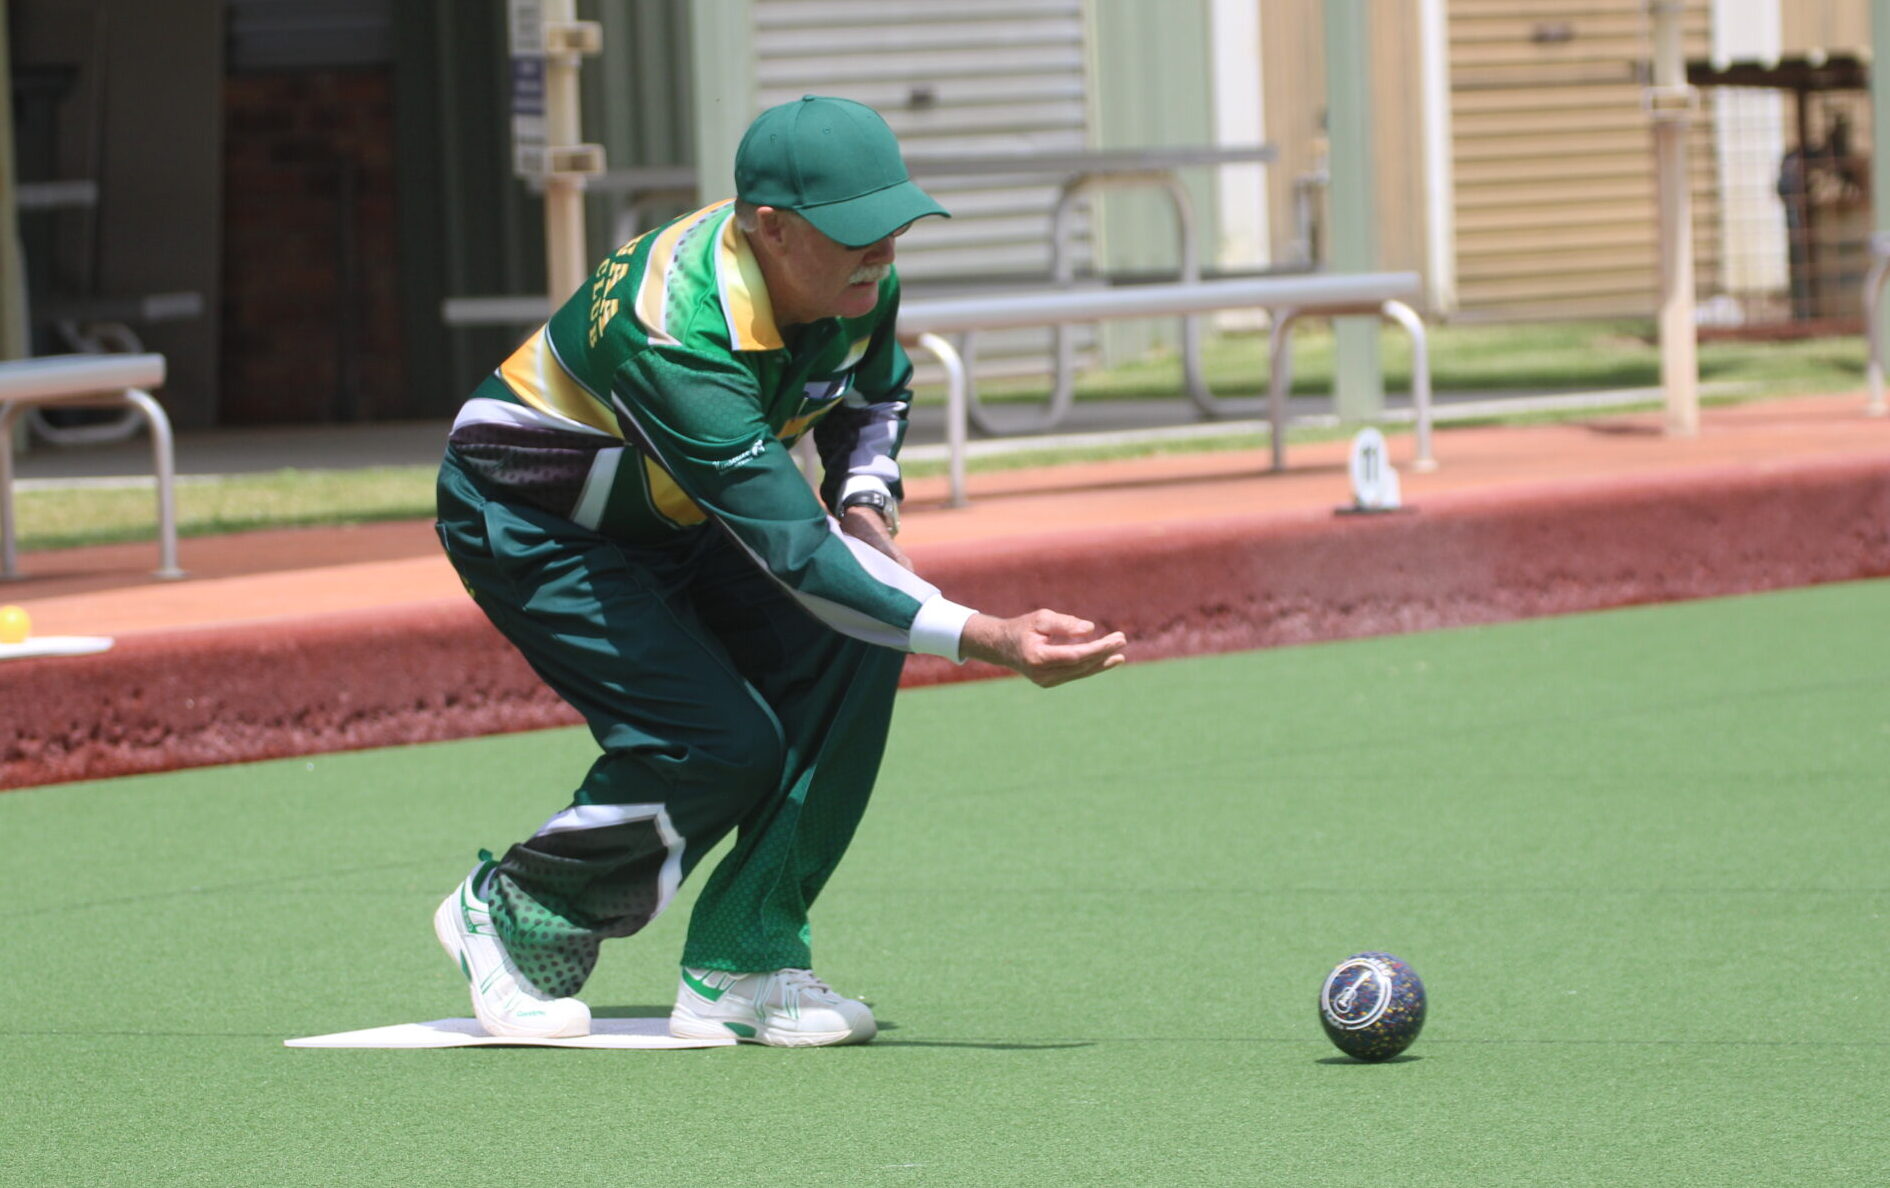 Wee Waa Bowling Club’s Over-60s Singles finalists decided following a blockbuster Saturday